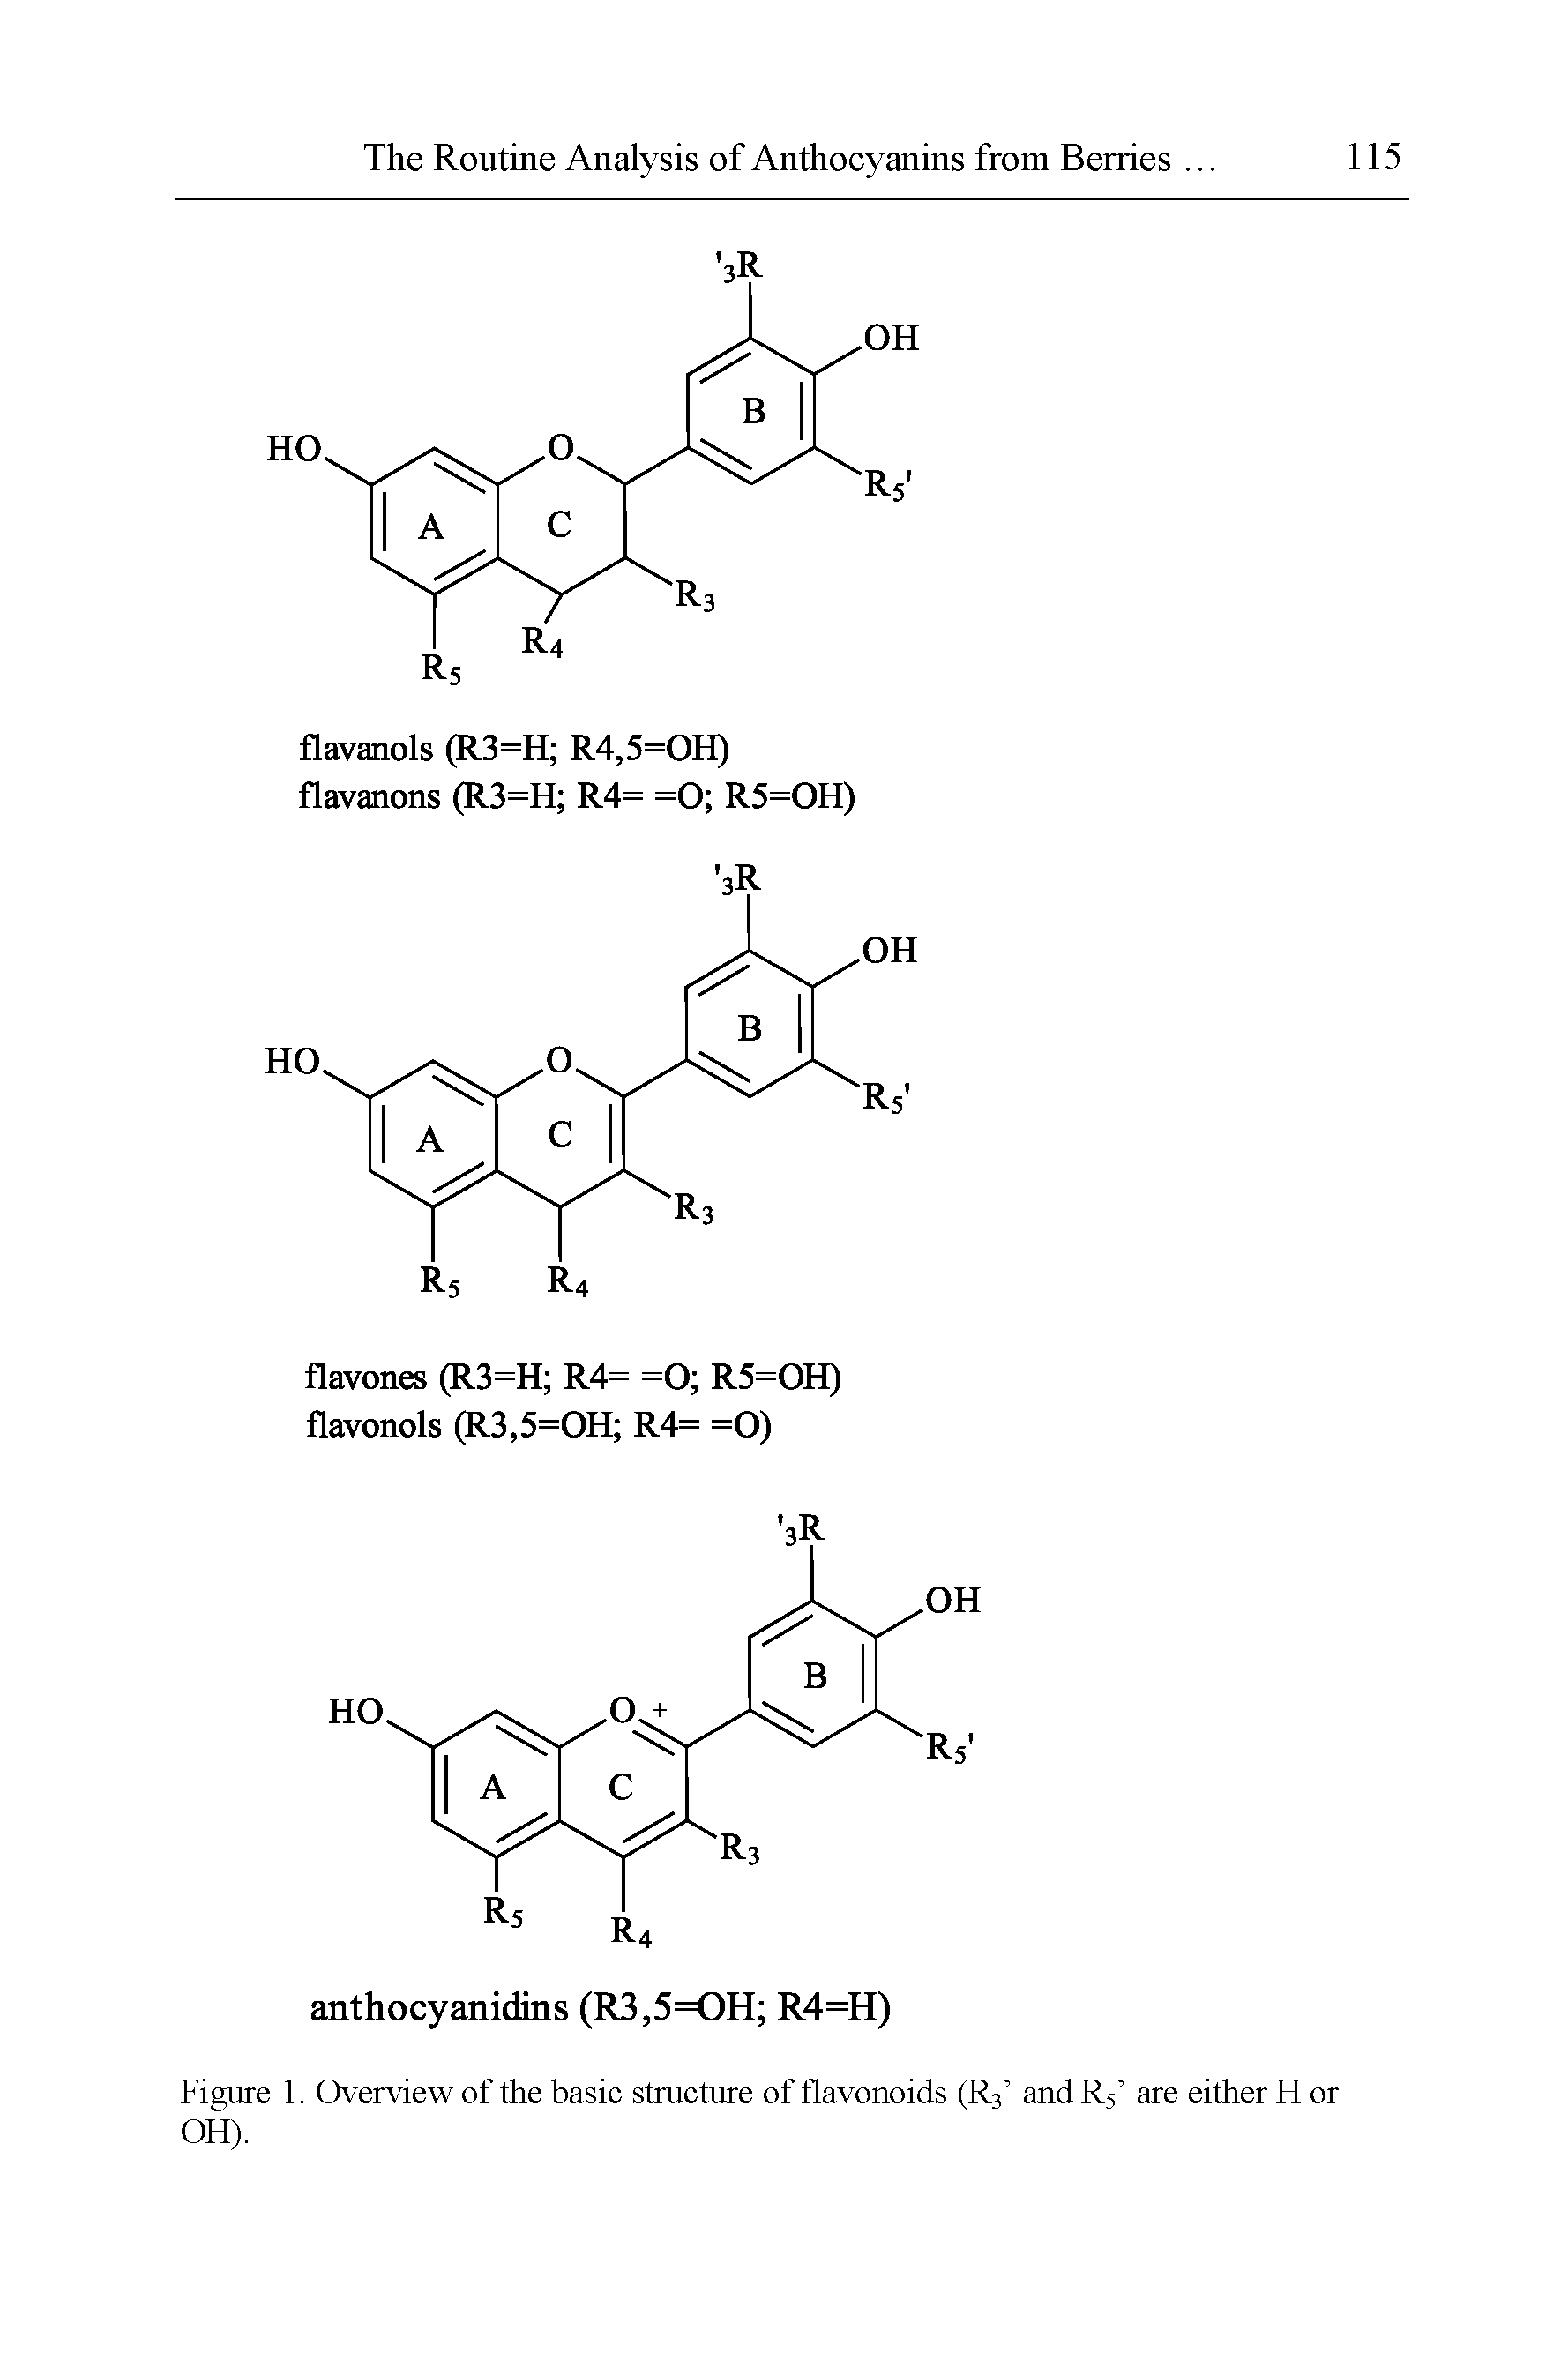 Figure 1. Overview of the basic structure of flavonoids (R3 and R5 are either H or OH).